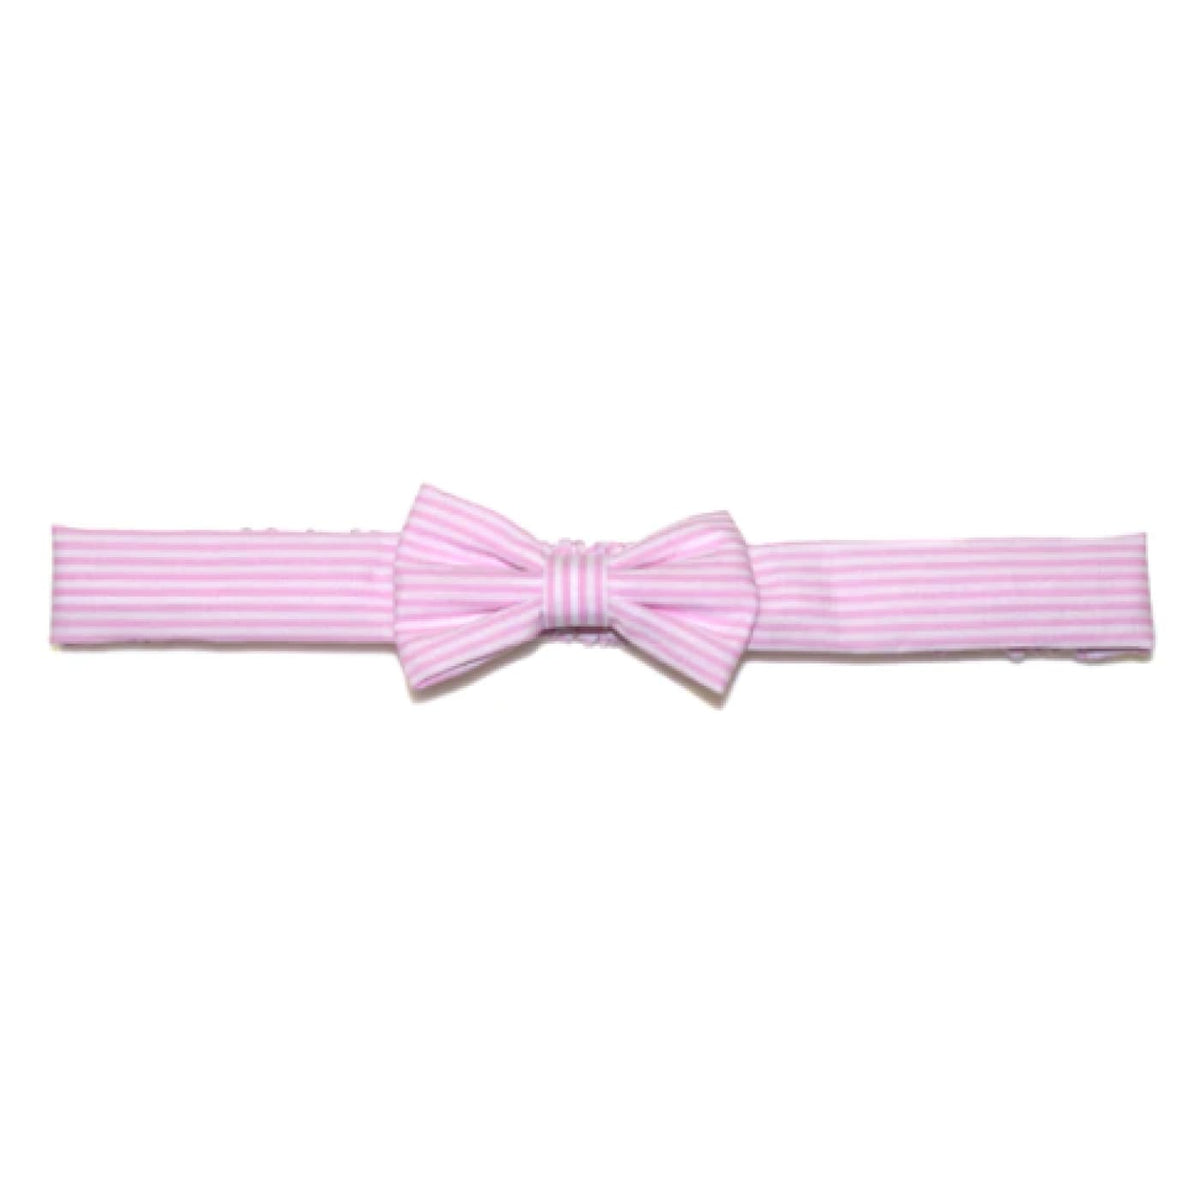 Goody Gumdrops Baby Striped Bow Headband - Pink - Pink - BABY &amp; TODDLER CLOTHING - HEADBANDS/HAIR CLIPS